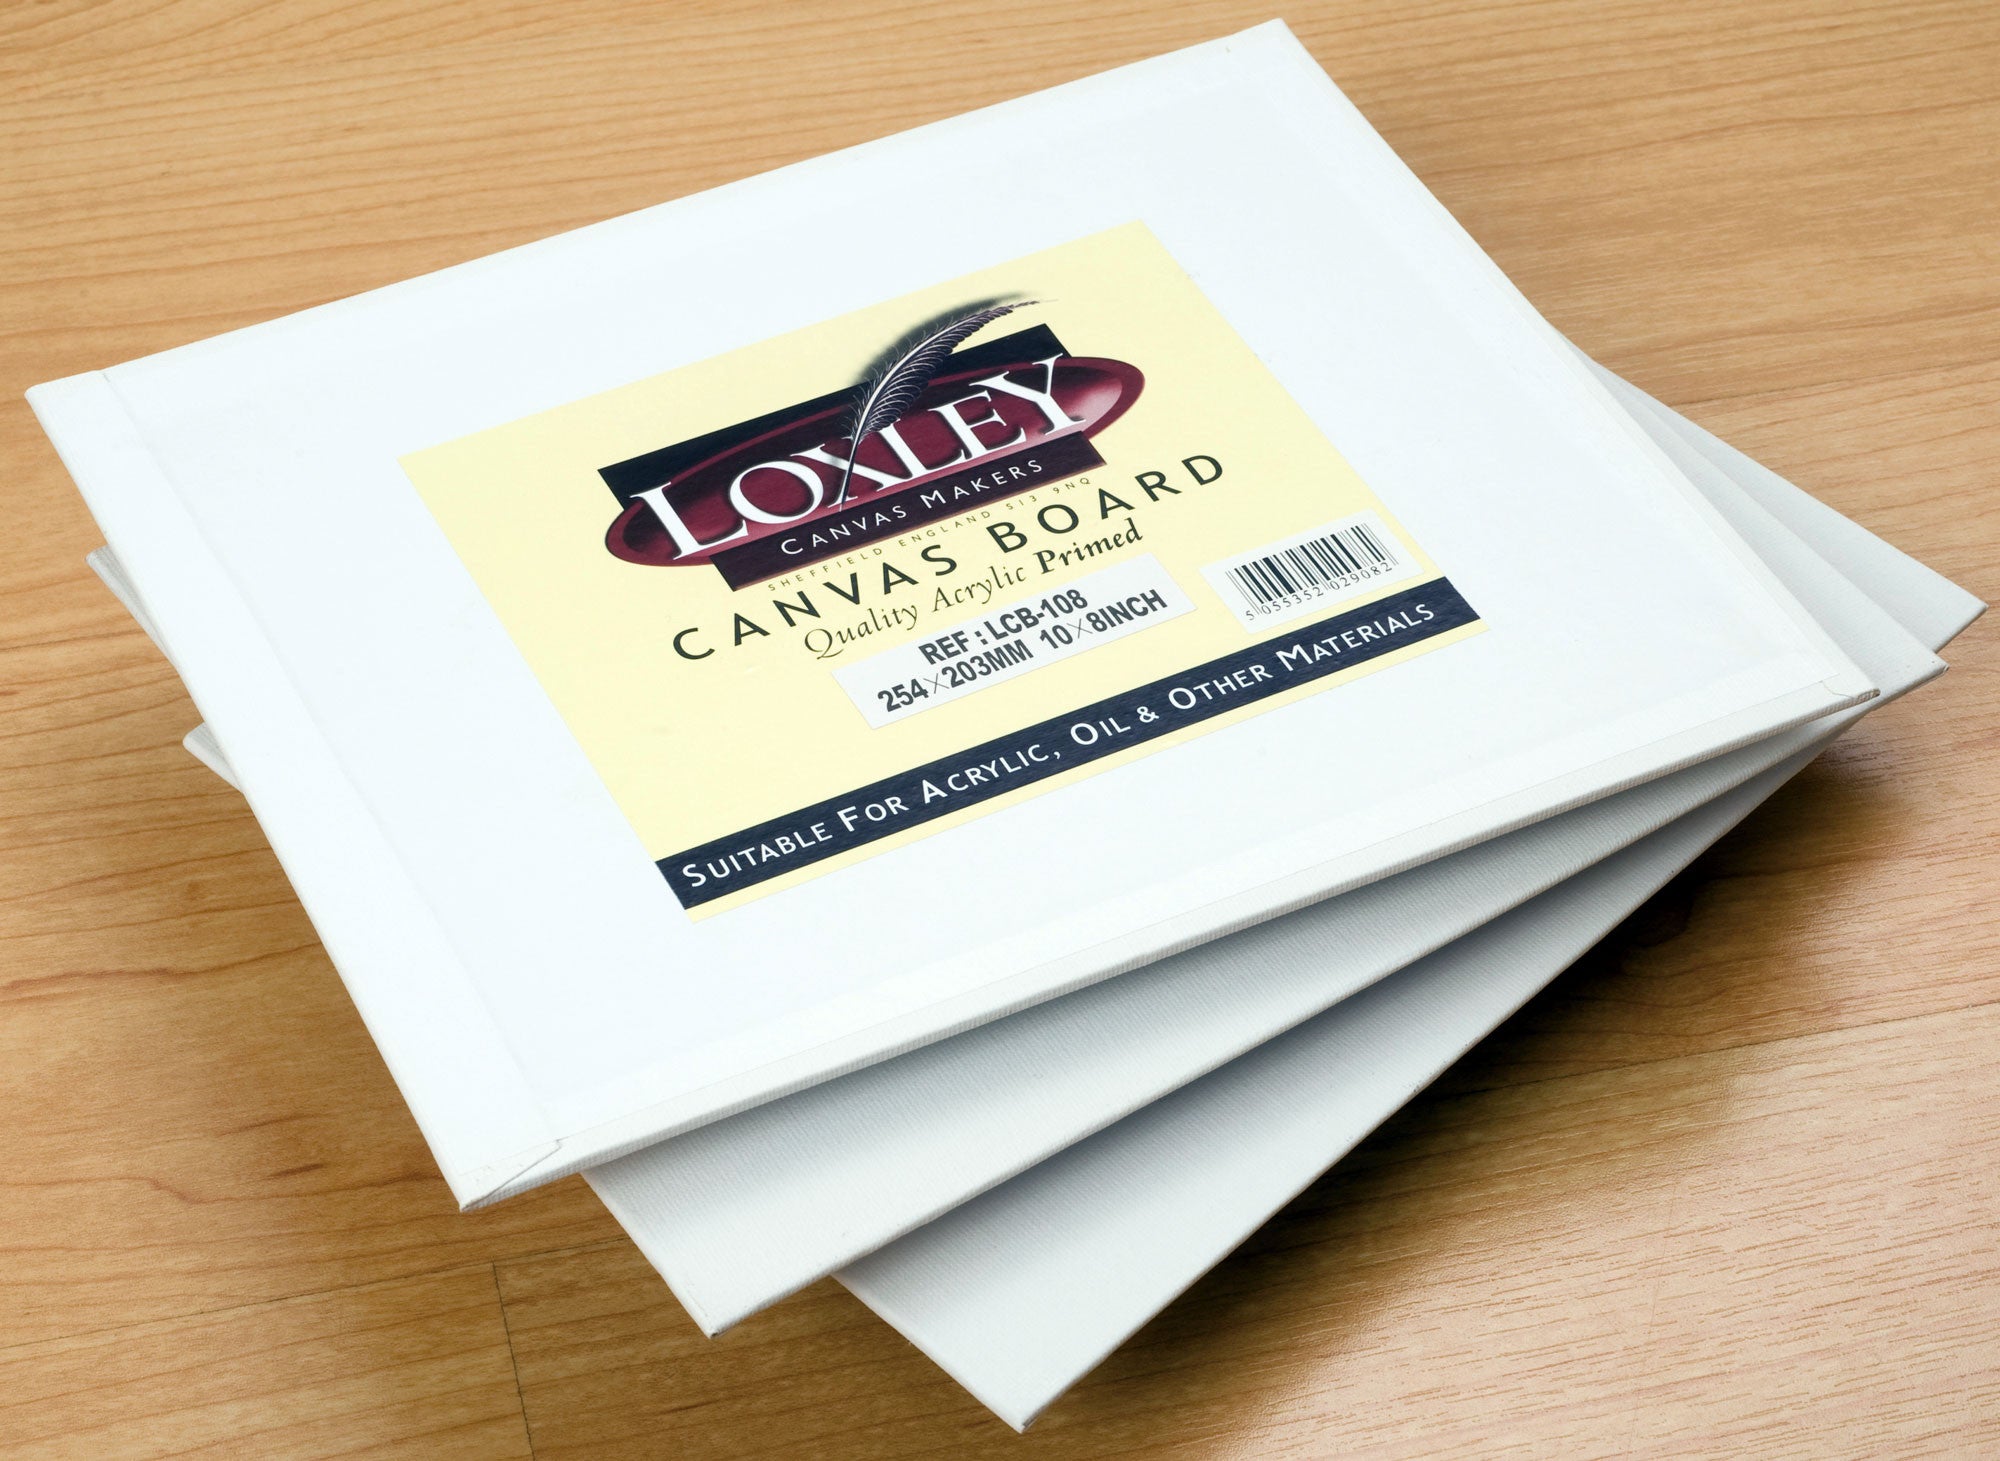 LOXLEY CANVAS BOARD - VARIOUS SIZES